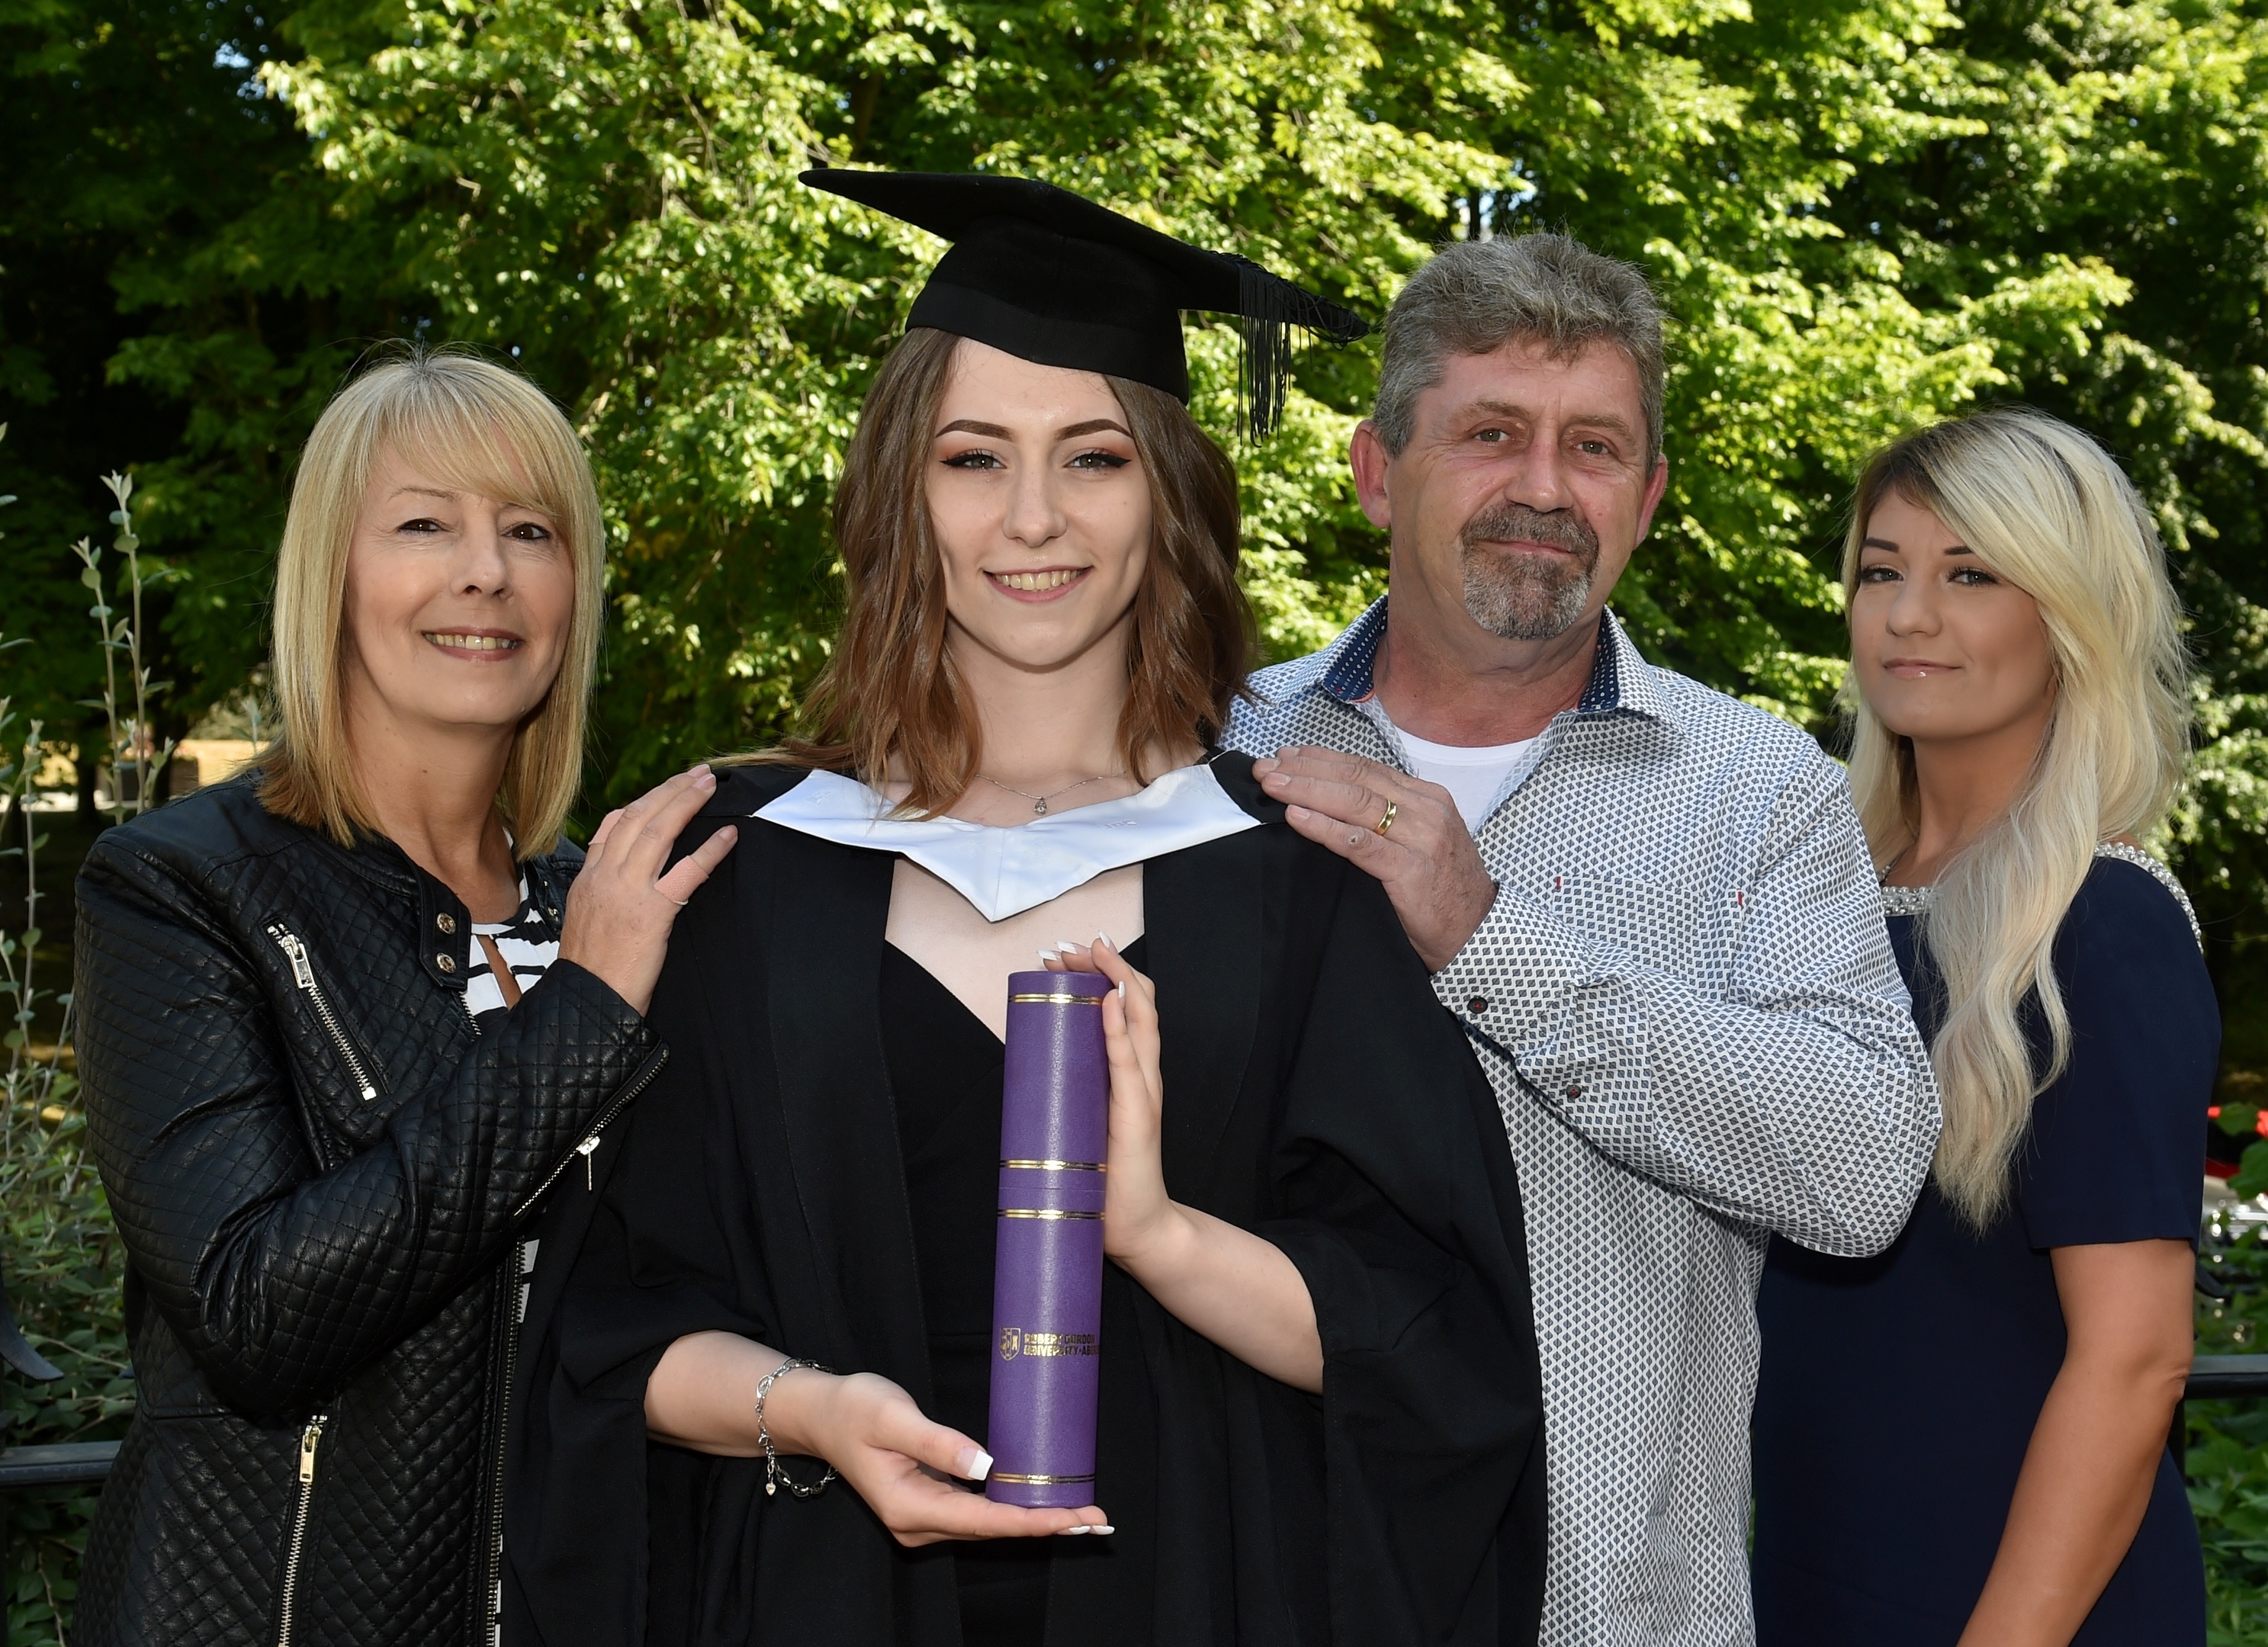 Jade Gilbert BA (hons) Contemporary Art Practice (Aberdeen). She is pictured with mum Sandra, Dad David and sister Zara.
Picture by Colin Rennie.